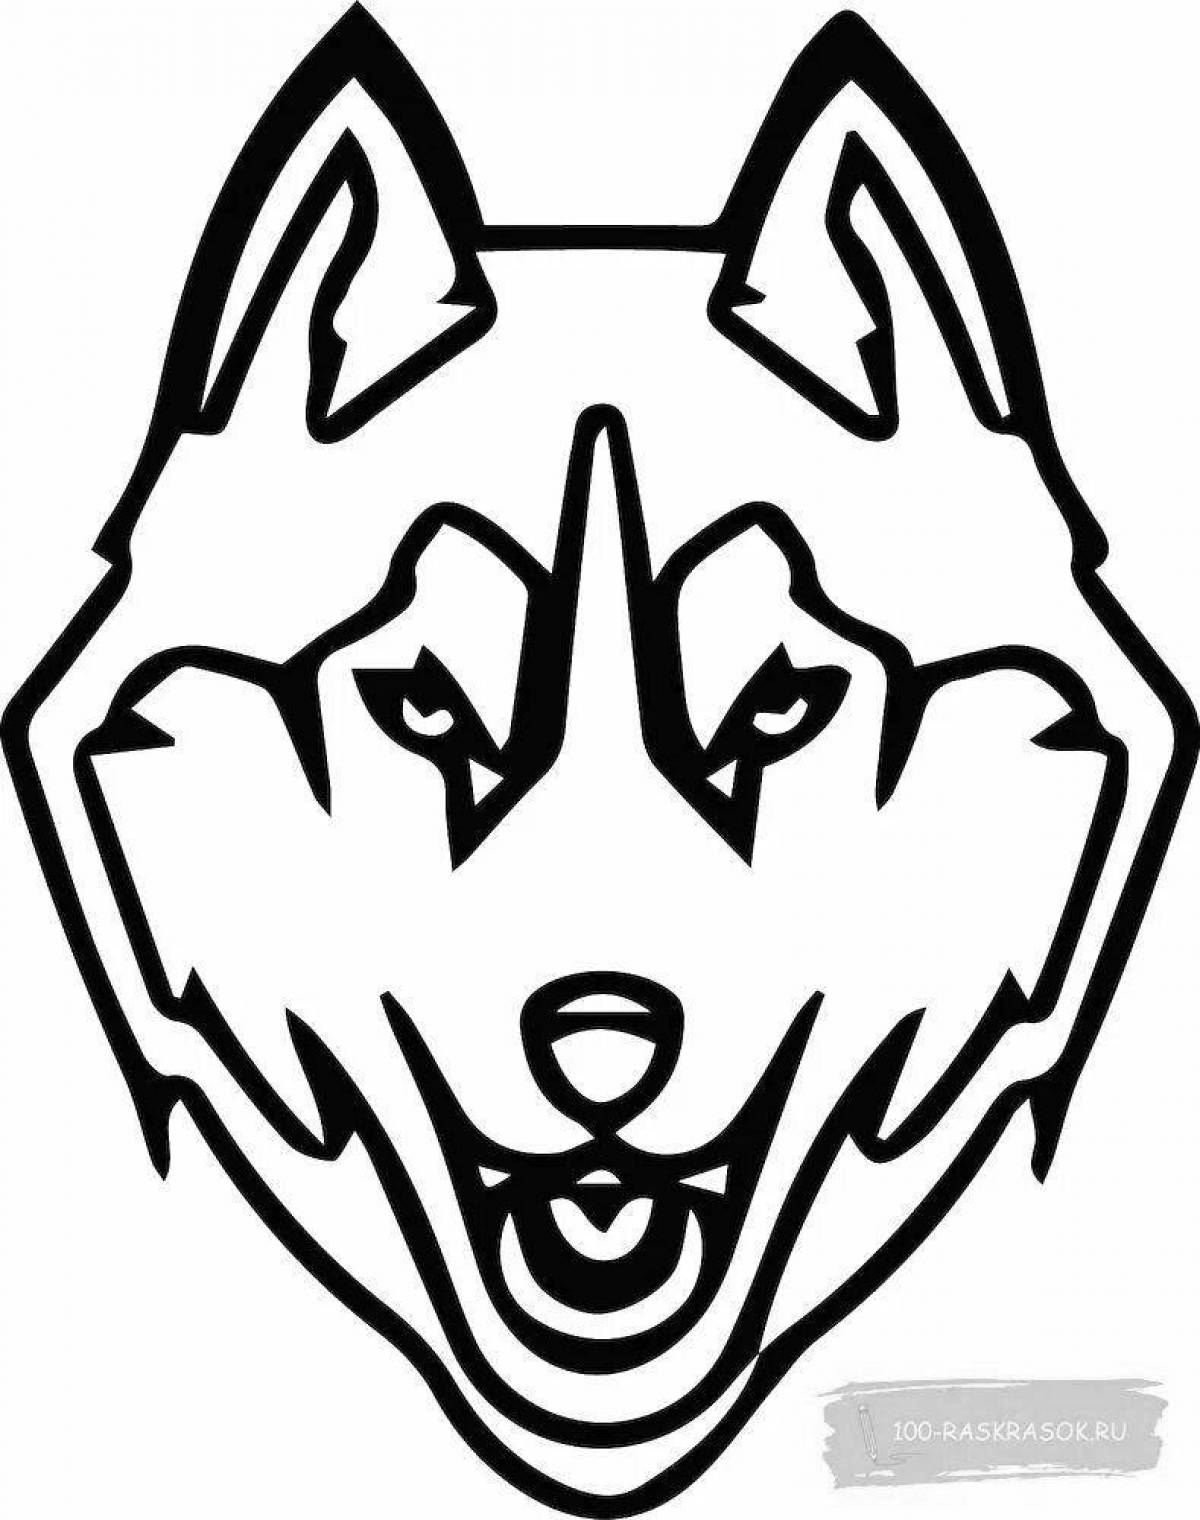 An interesting husky coloring book for kids